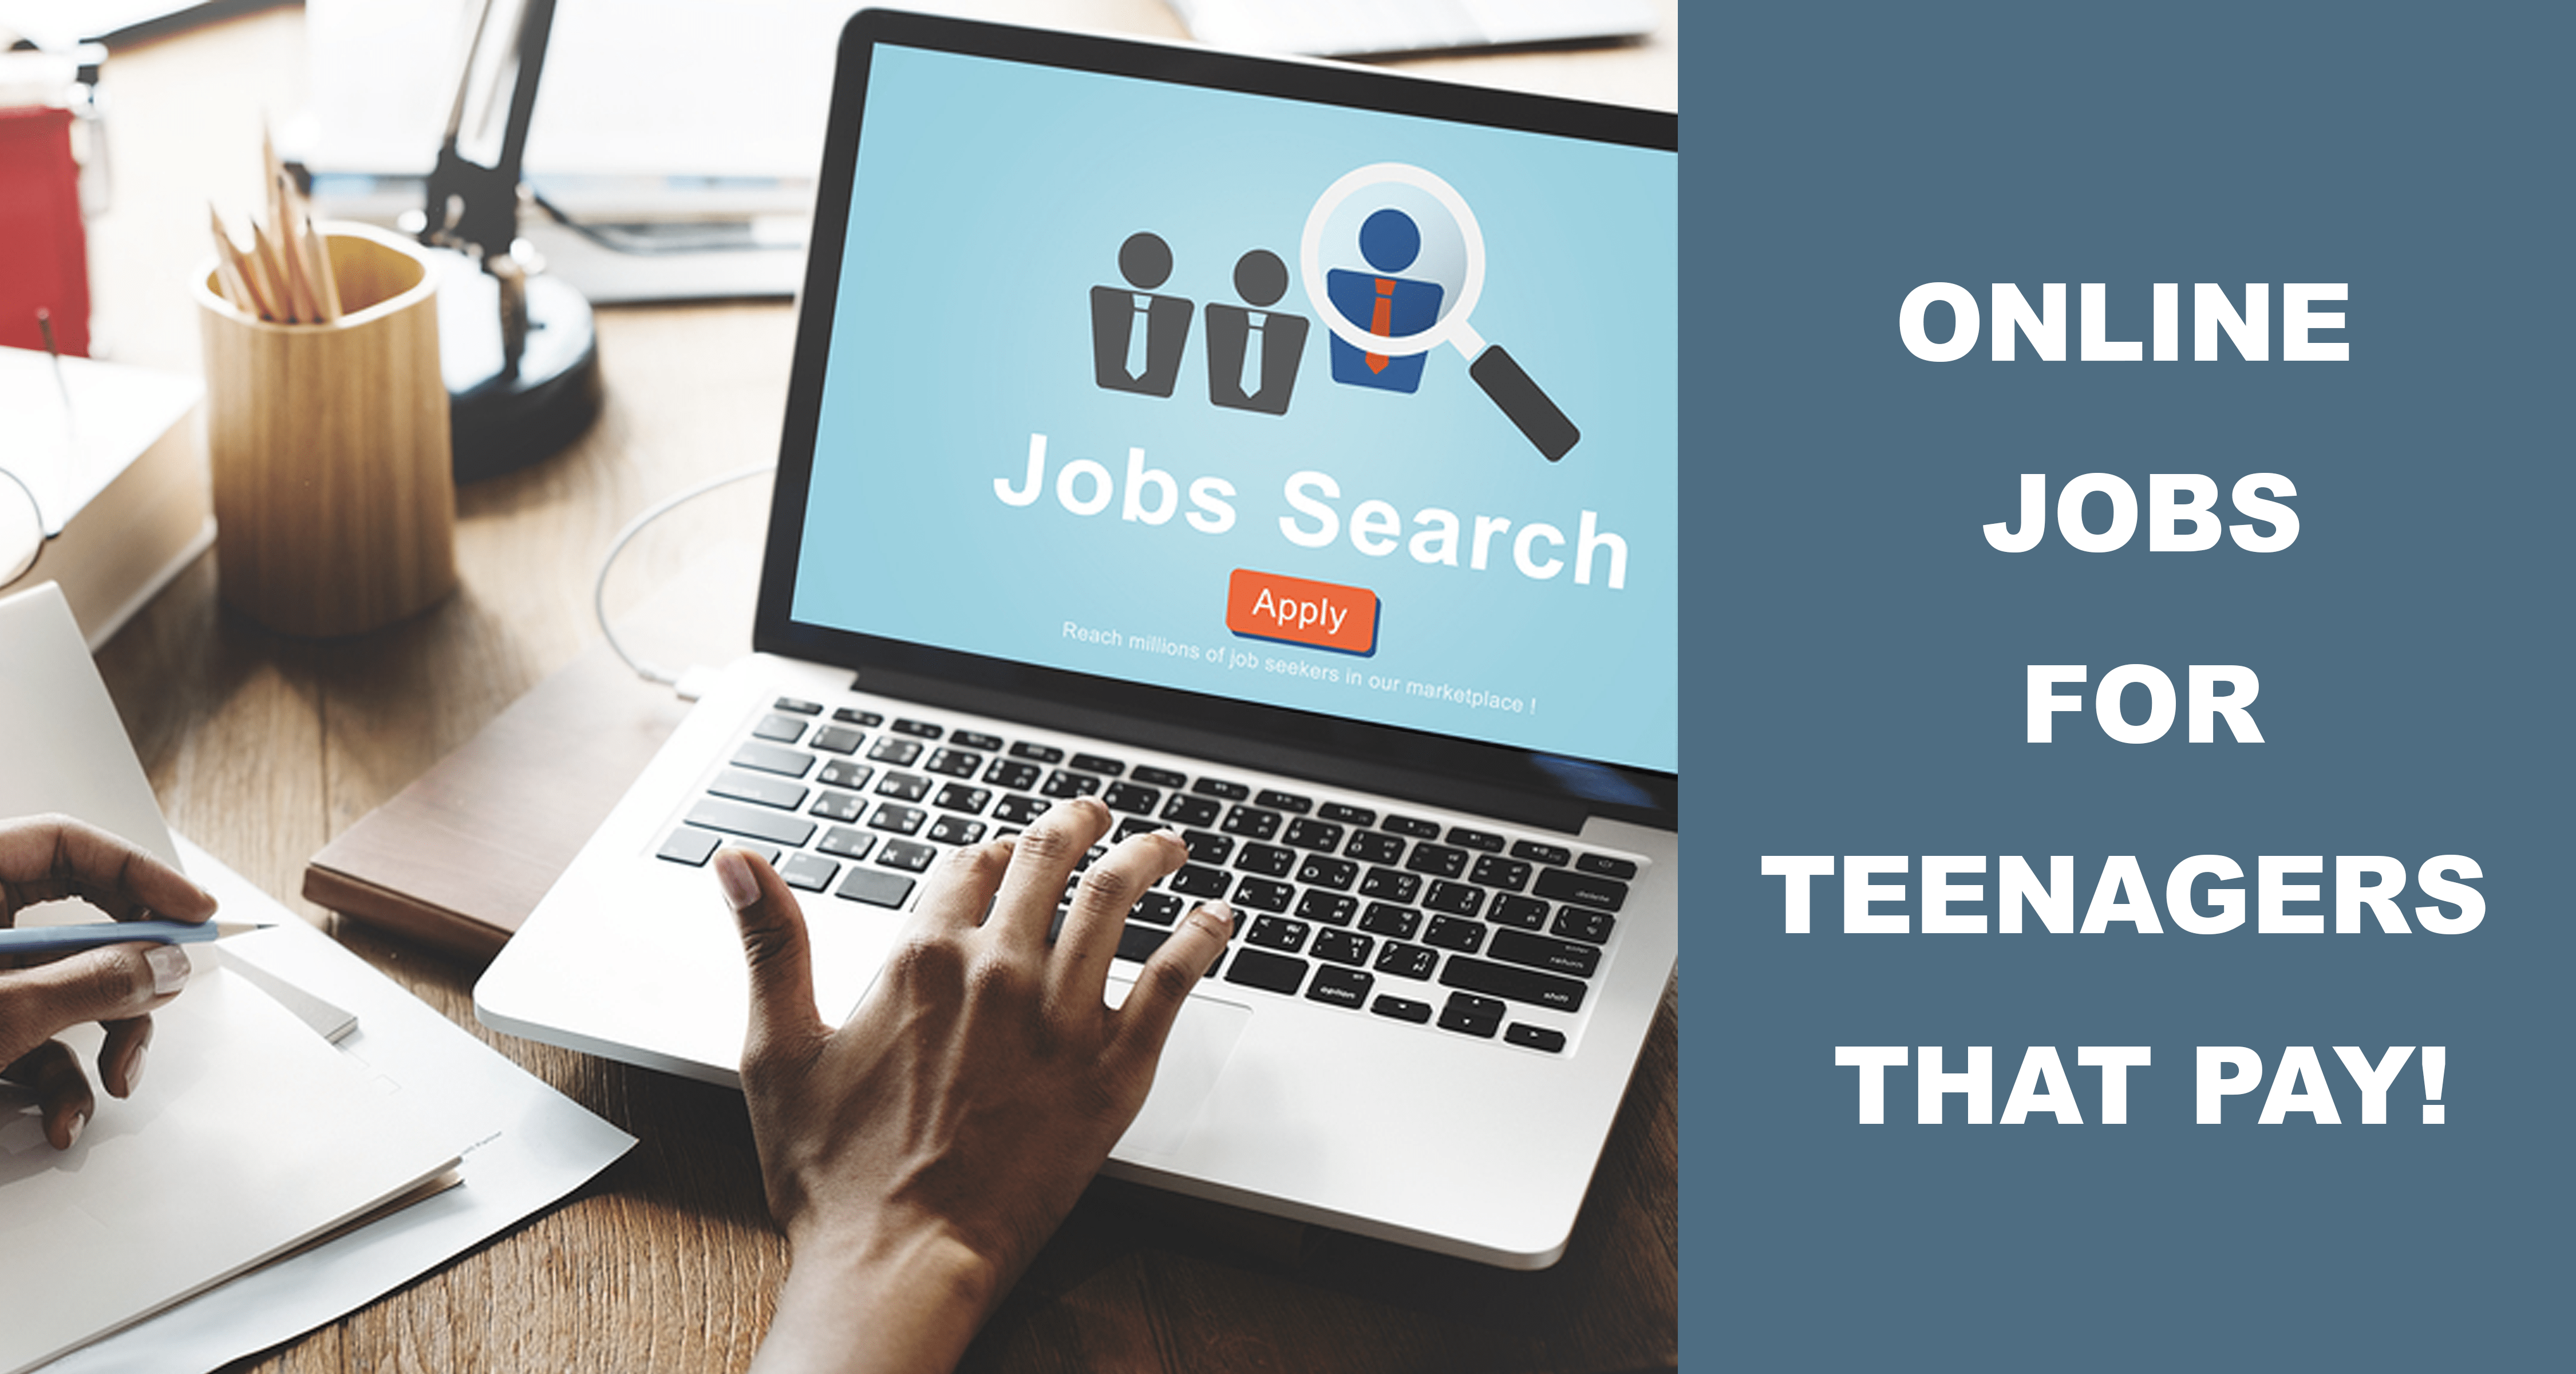 Online Jobs For Teenagers That Pay! Work from Home & Earn Money